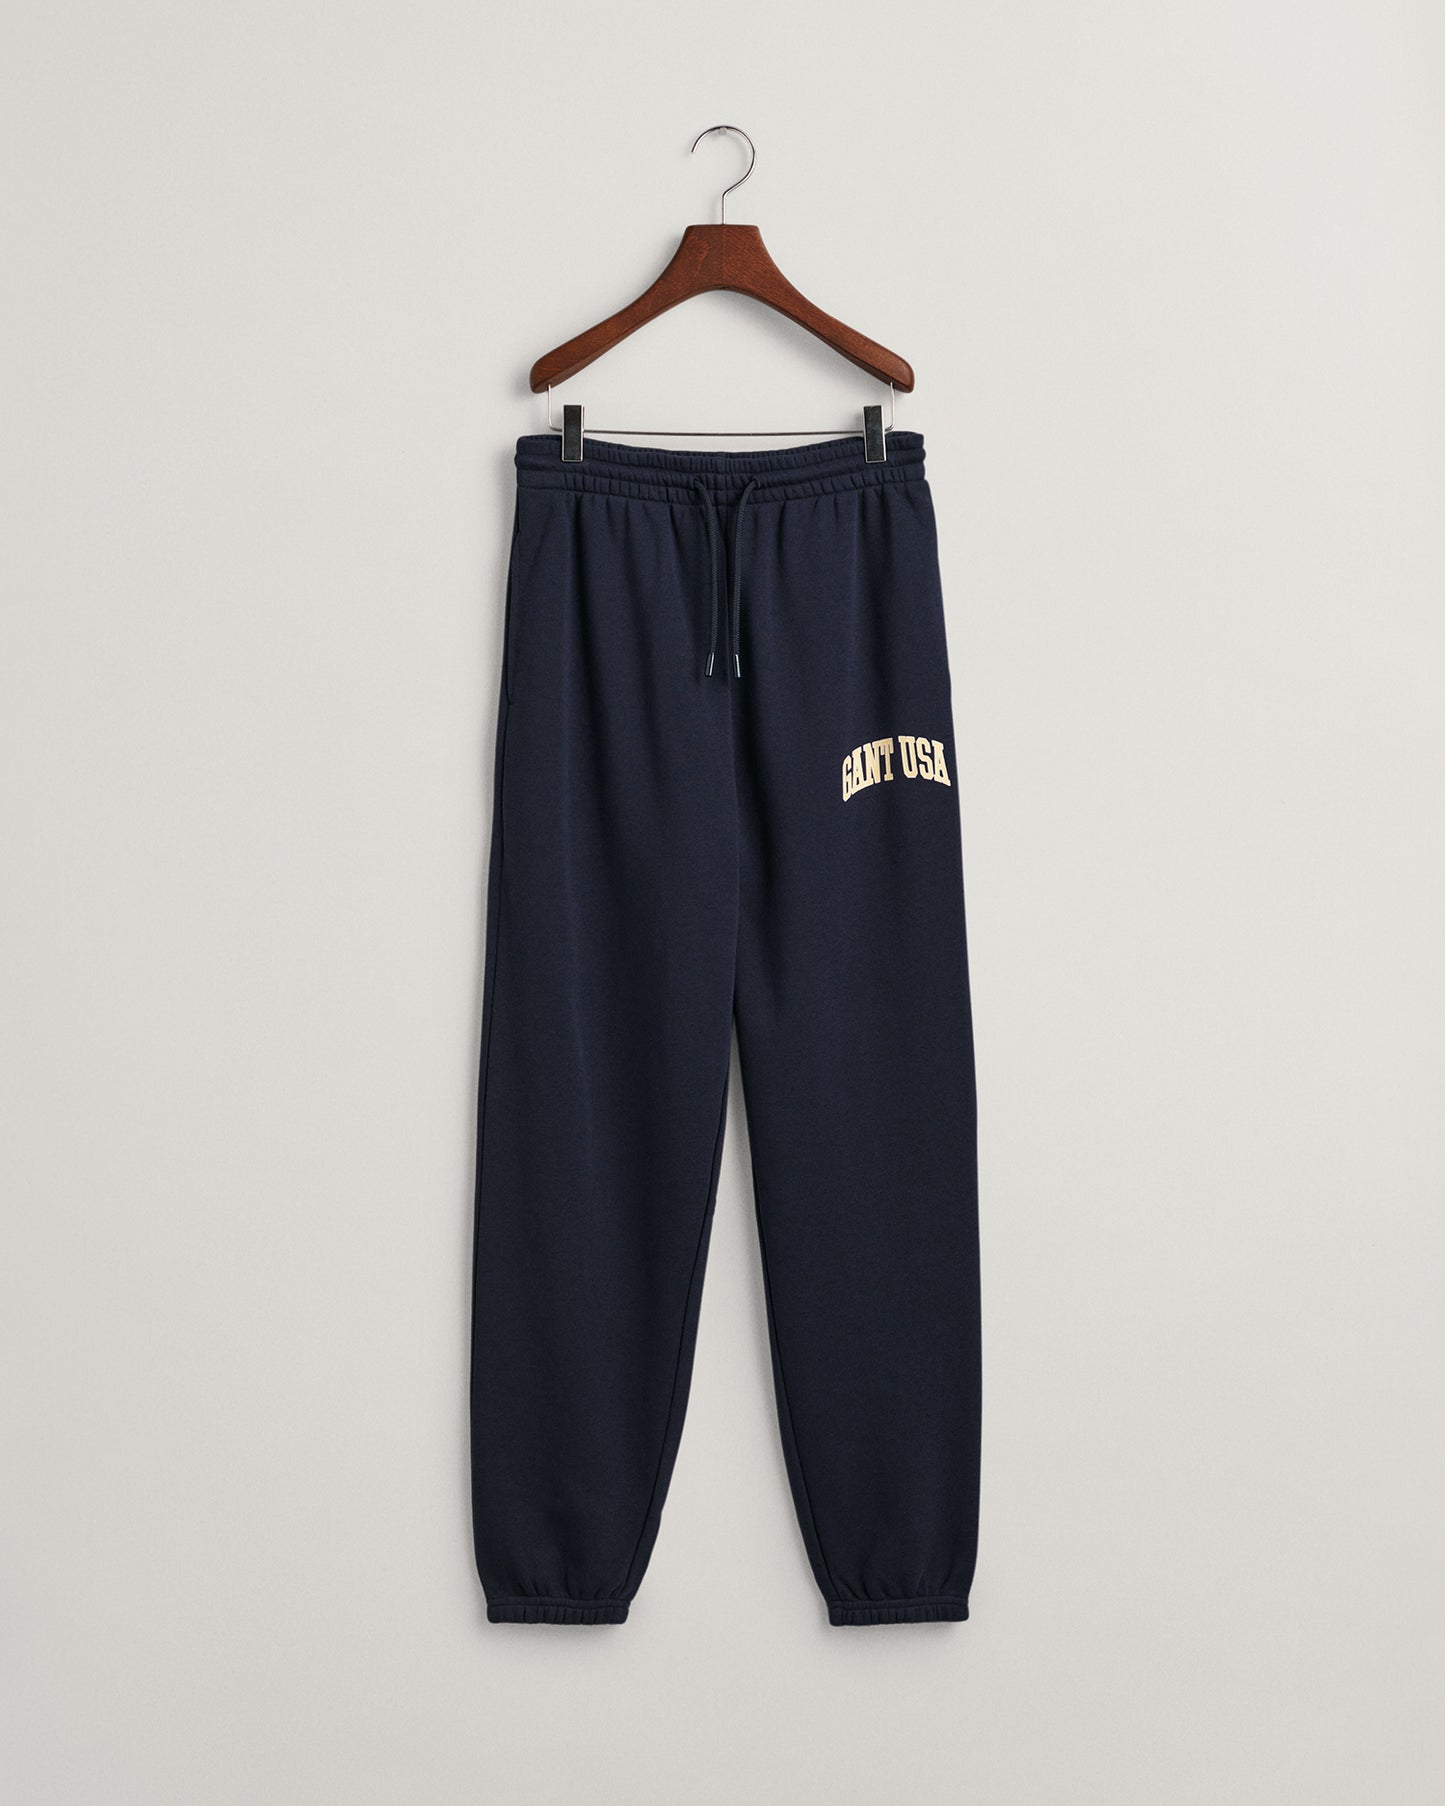 Gant Kids Navy Blue Solid Relaxed Fit Sweatpant